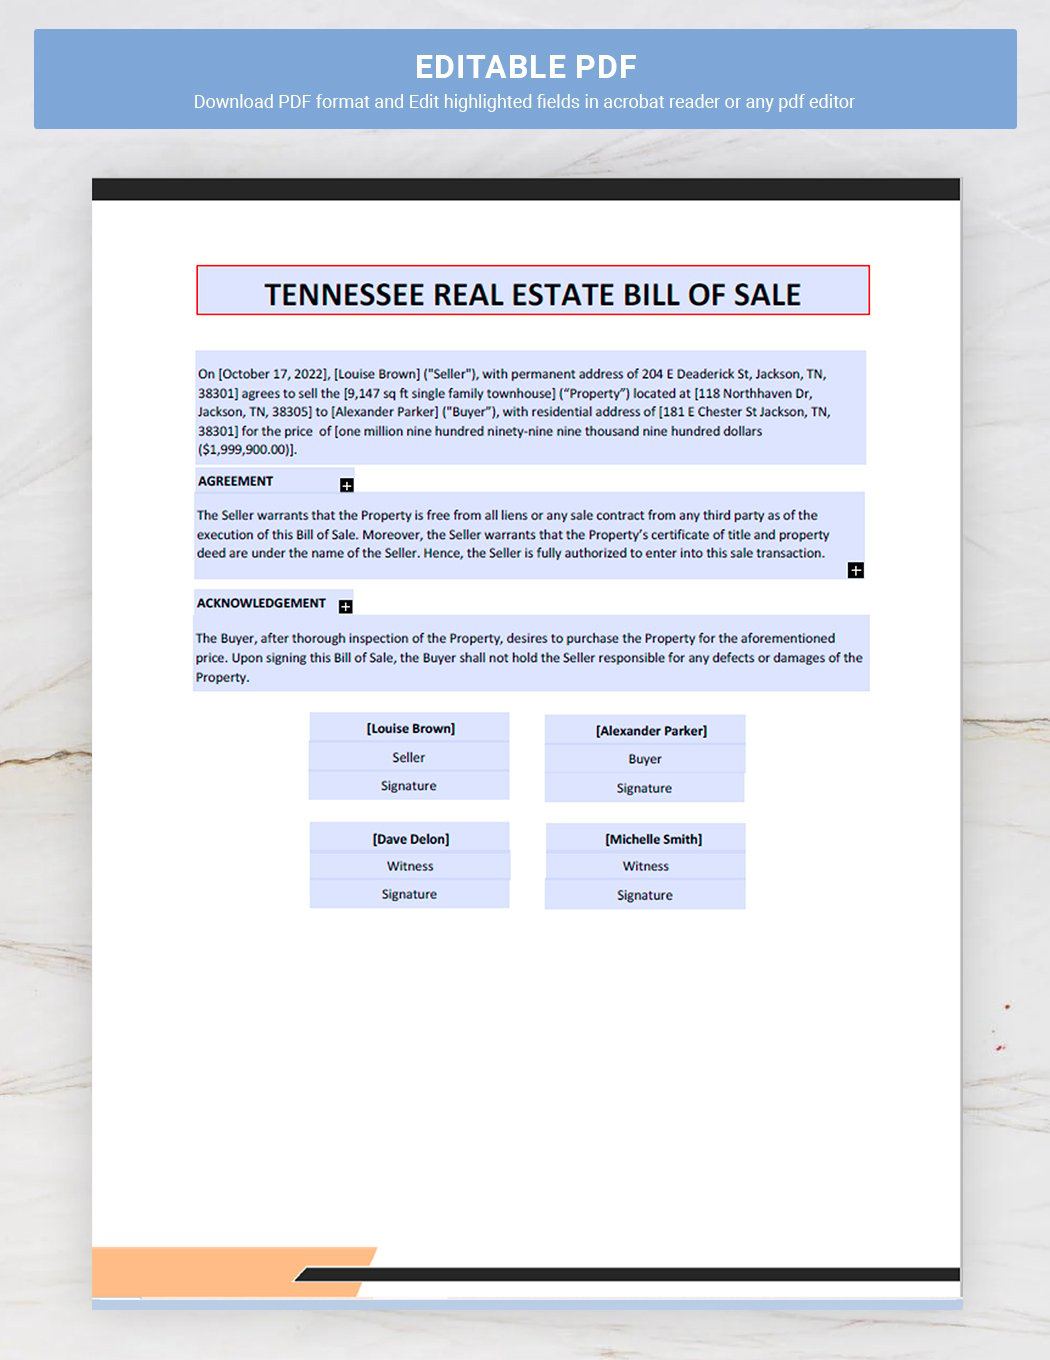 Tennessee Real Estate Bill of Sale Template